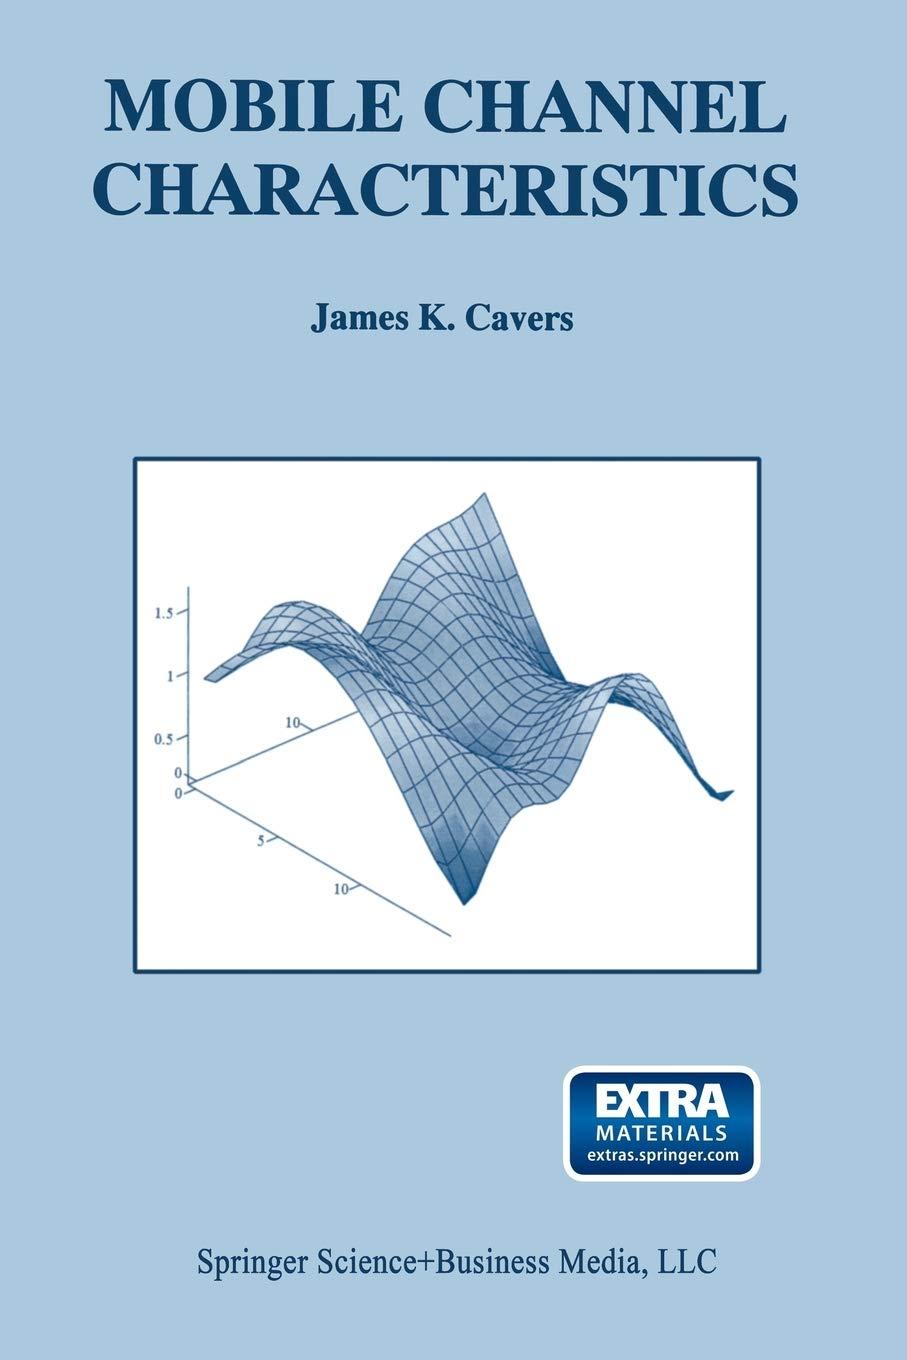 mobile channel characteristics 2002 edition james cavers 1475784171, 978-1475784176